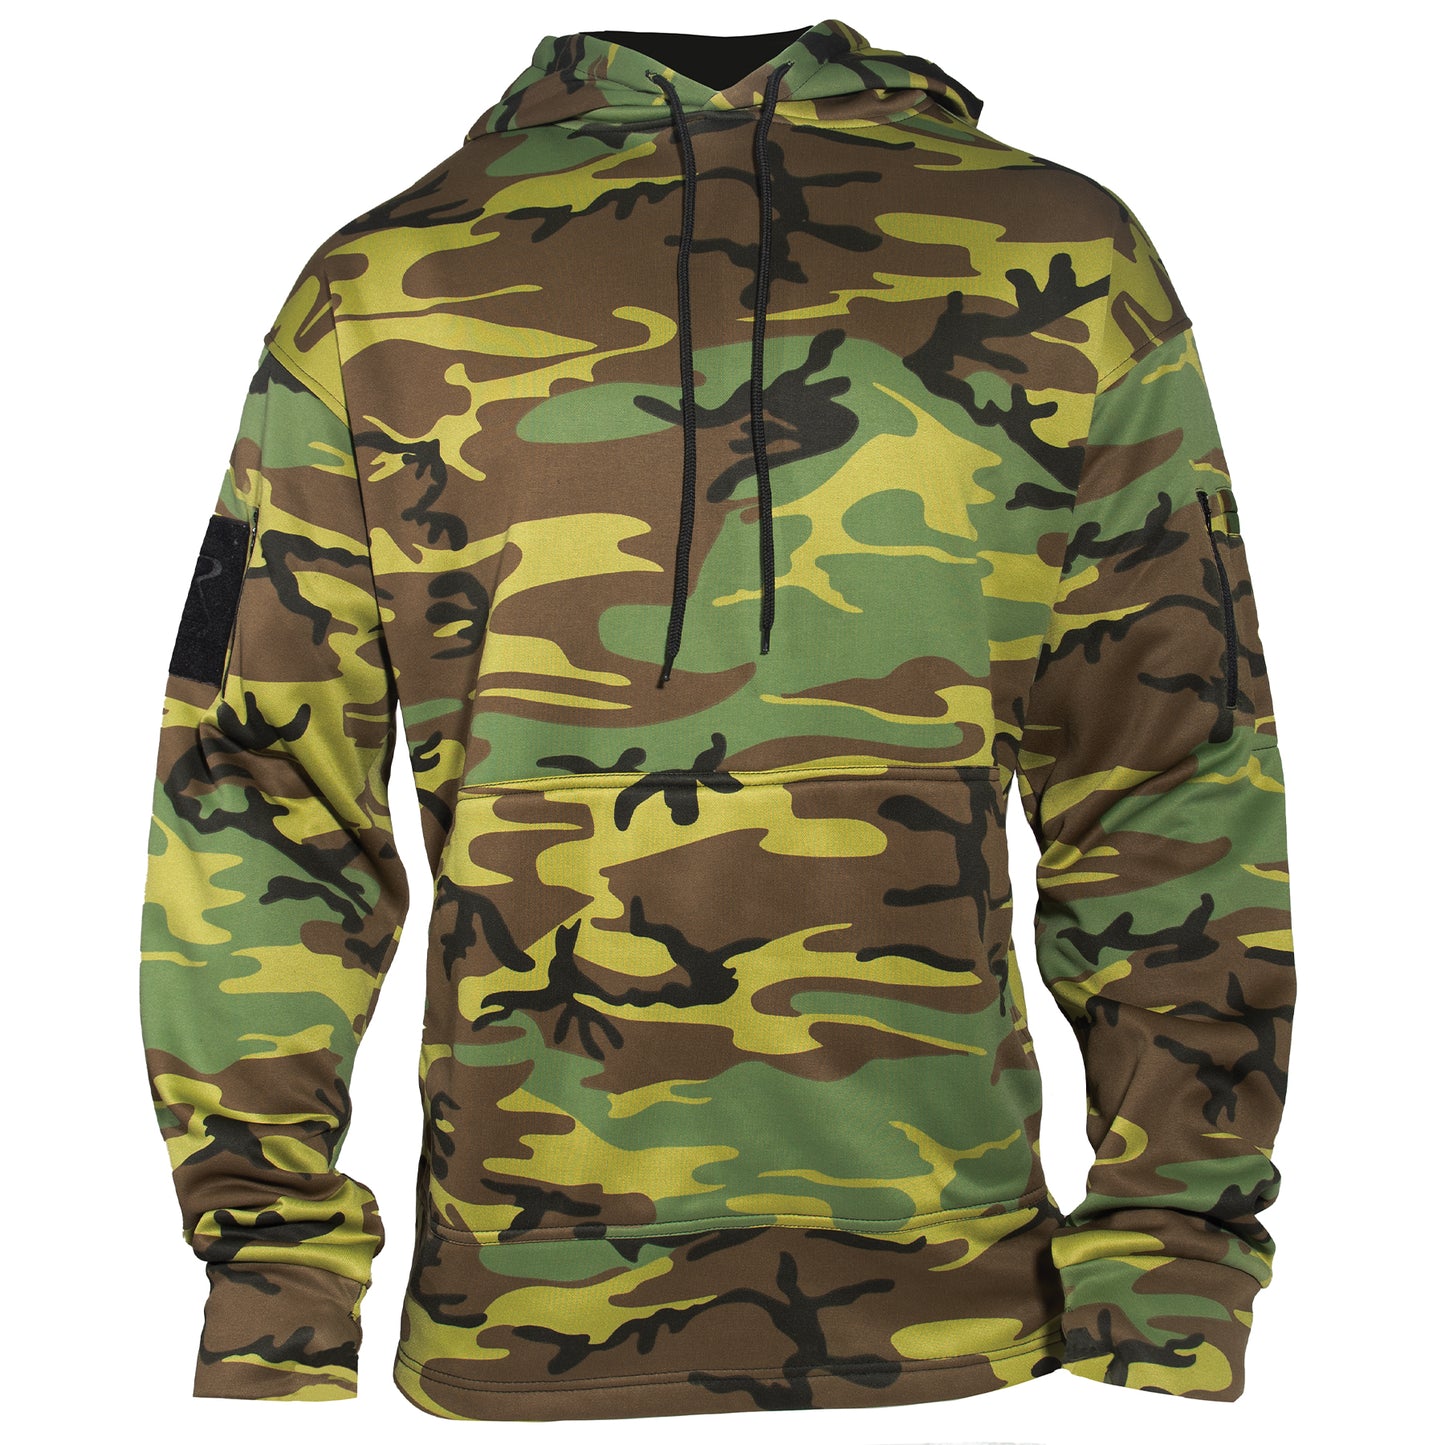 Men's Camouflage Concealed Carry Hoodies Tactical CCW Pullover Hooded Sweatshirt